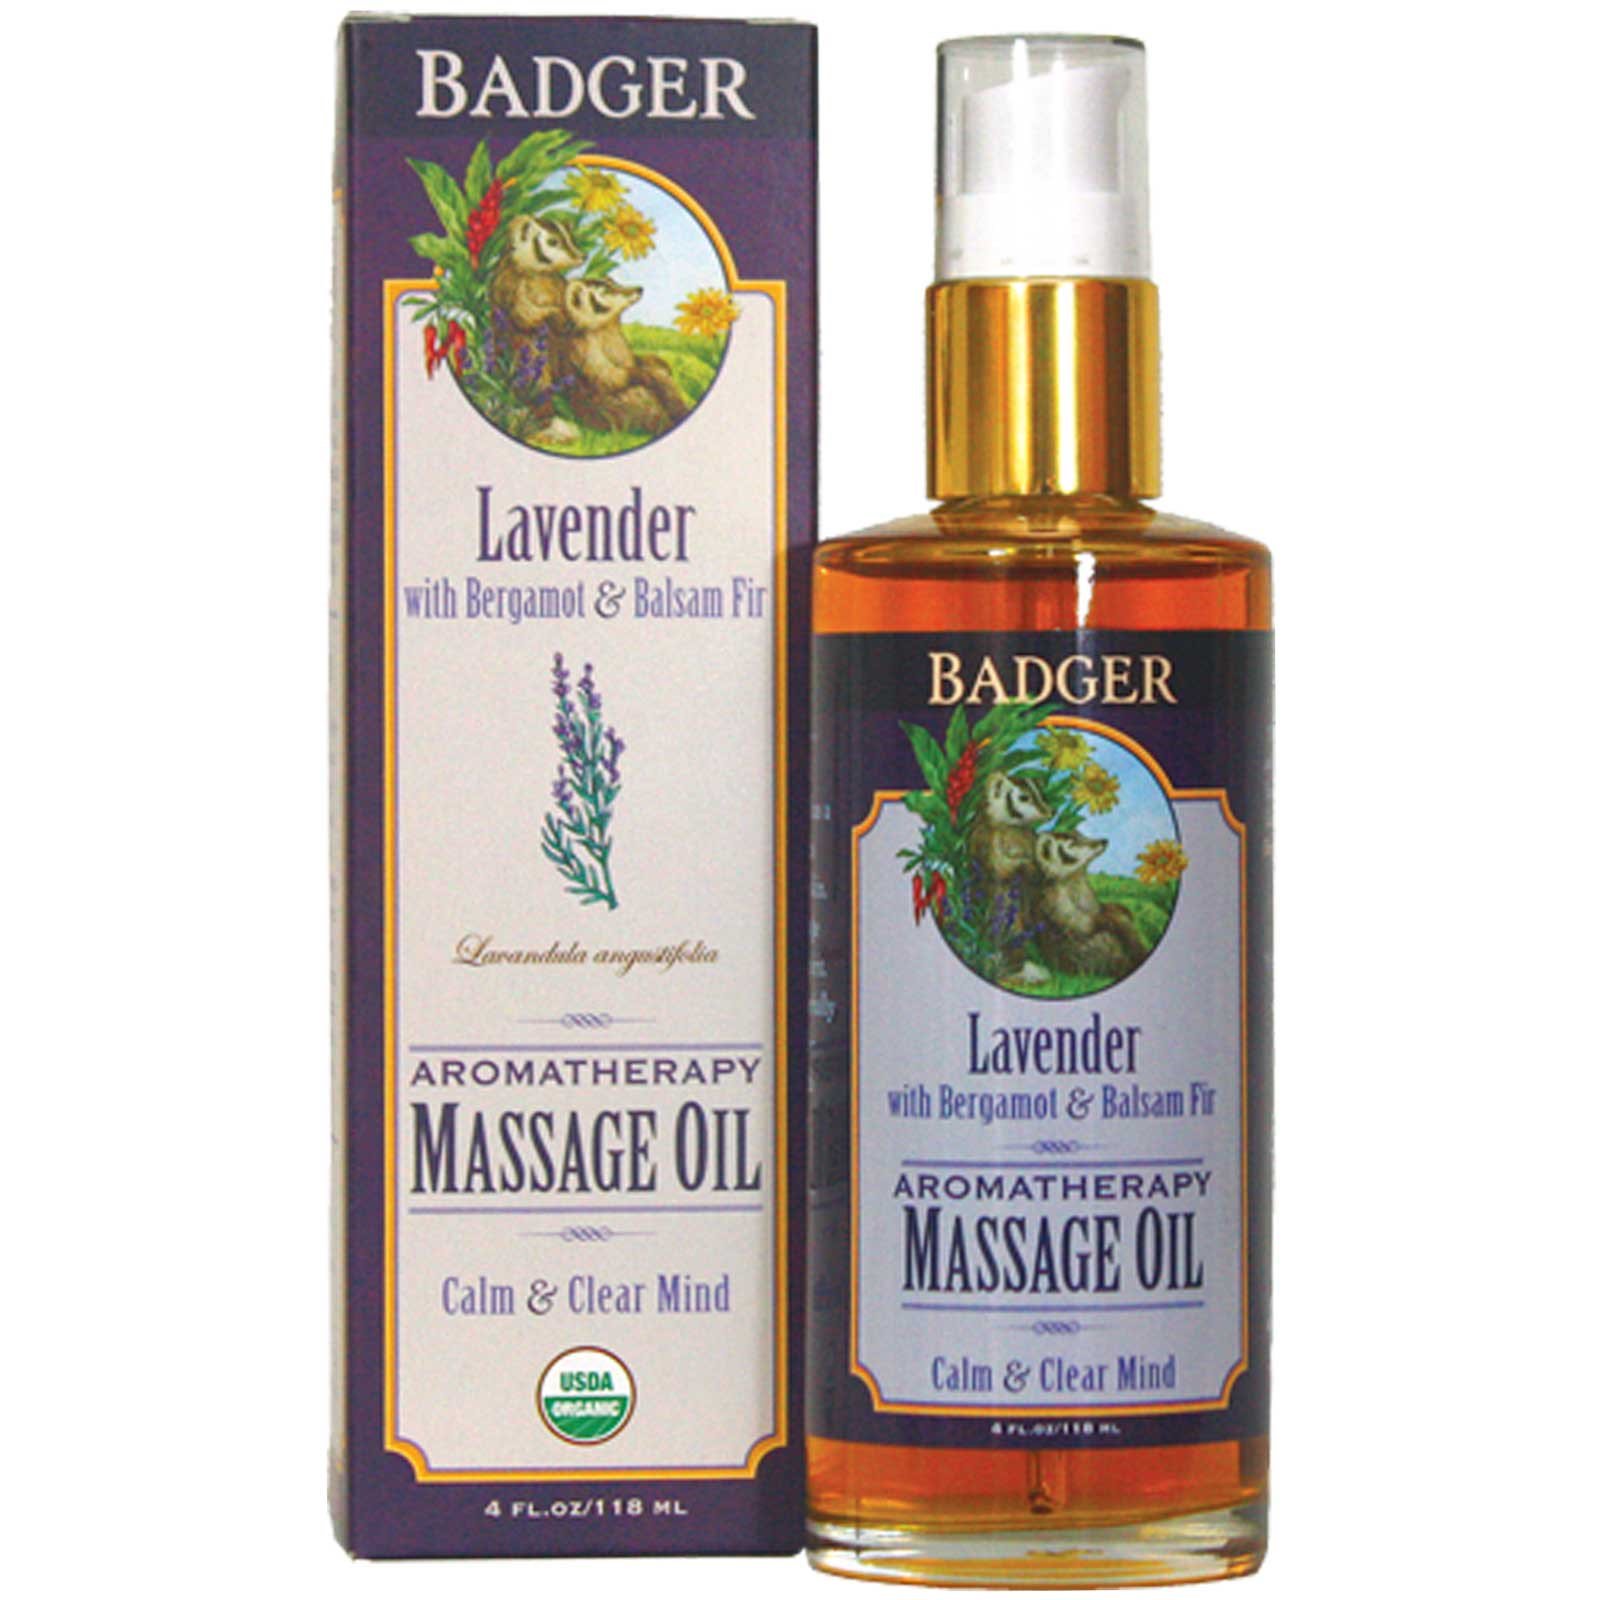 Badger Company Aromatherapy Massage Oil Lavender With Bergamot And Balsam Fir 4 Fl Oz 118 Ml